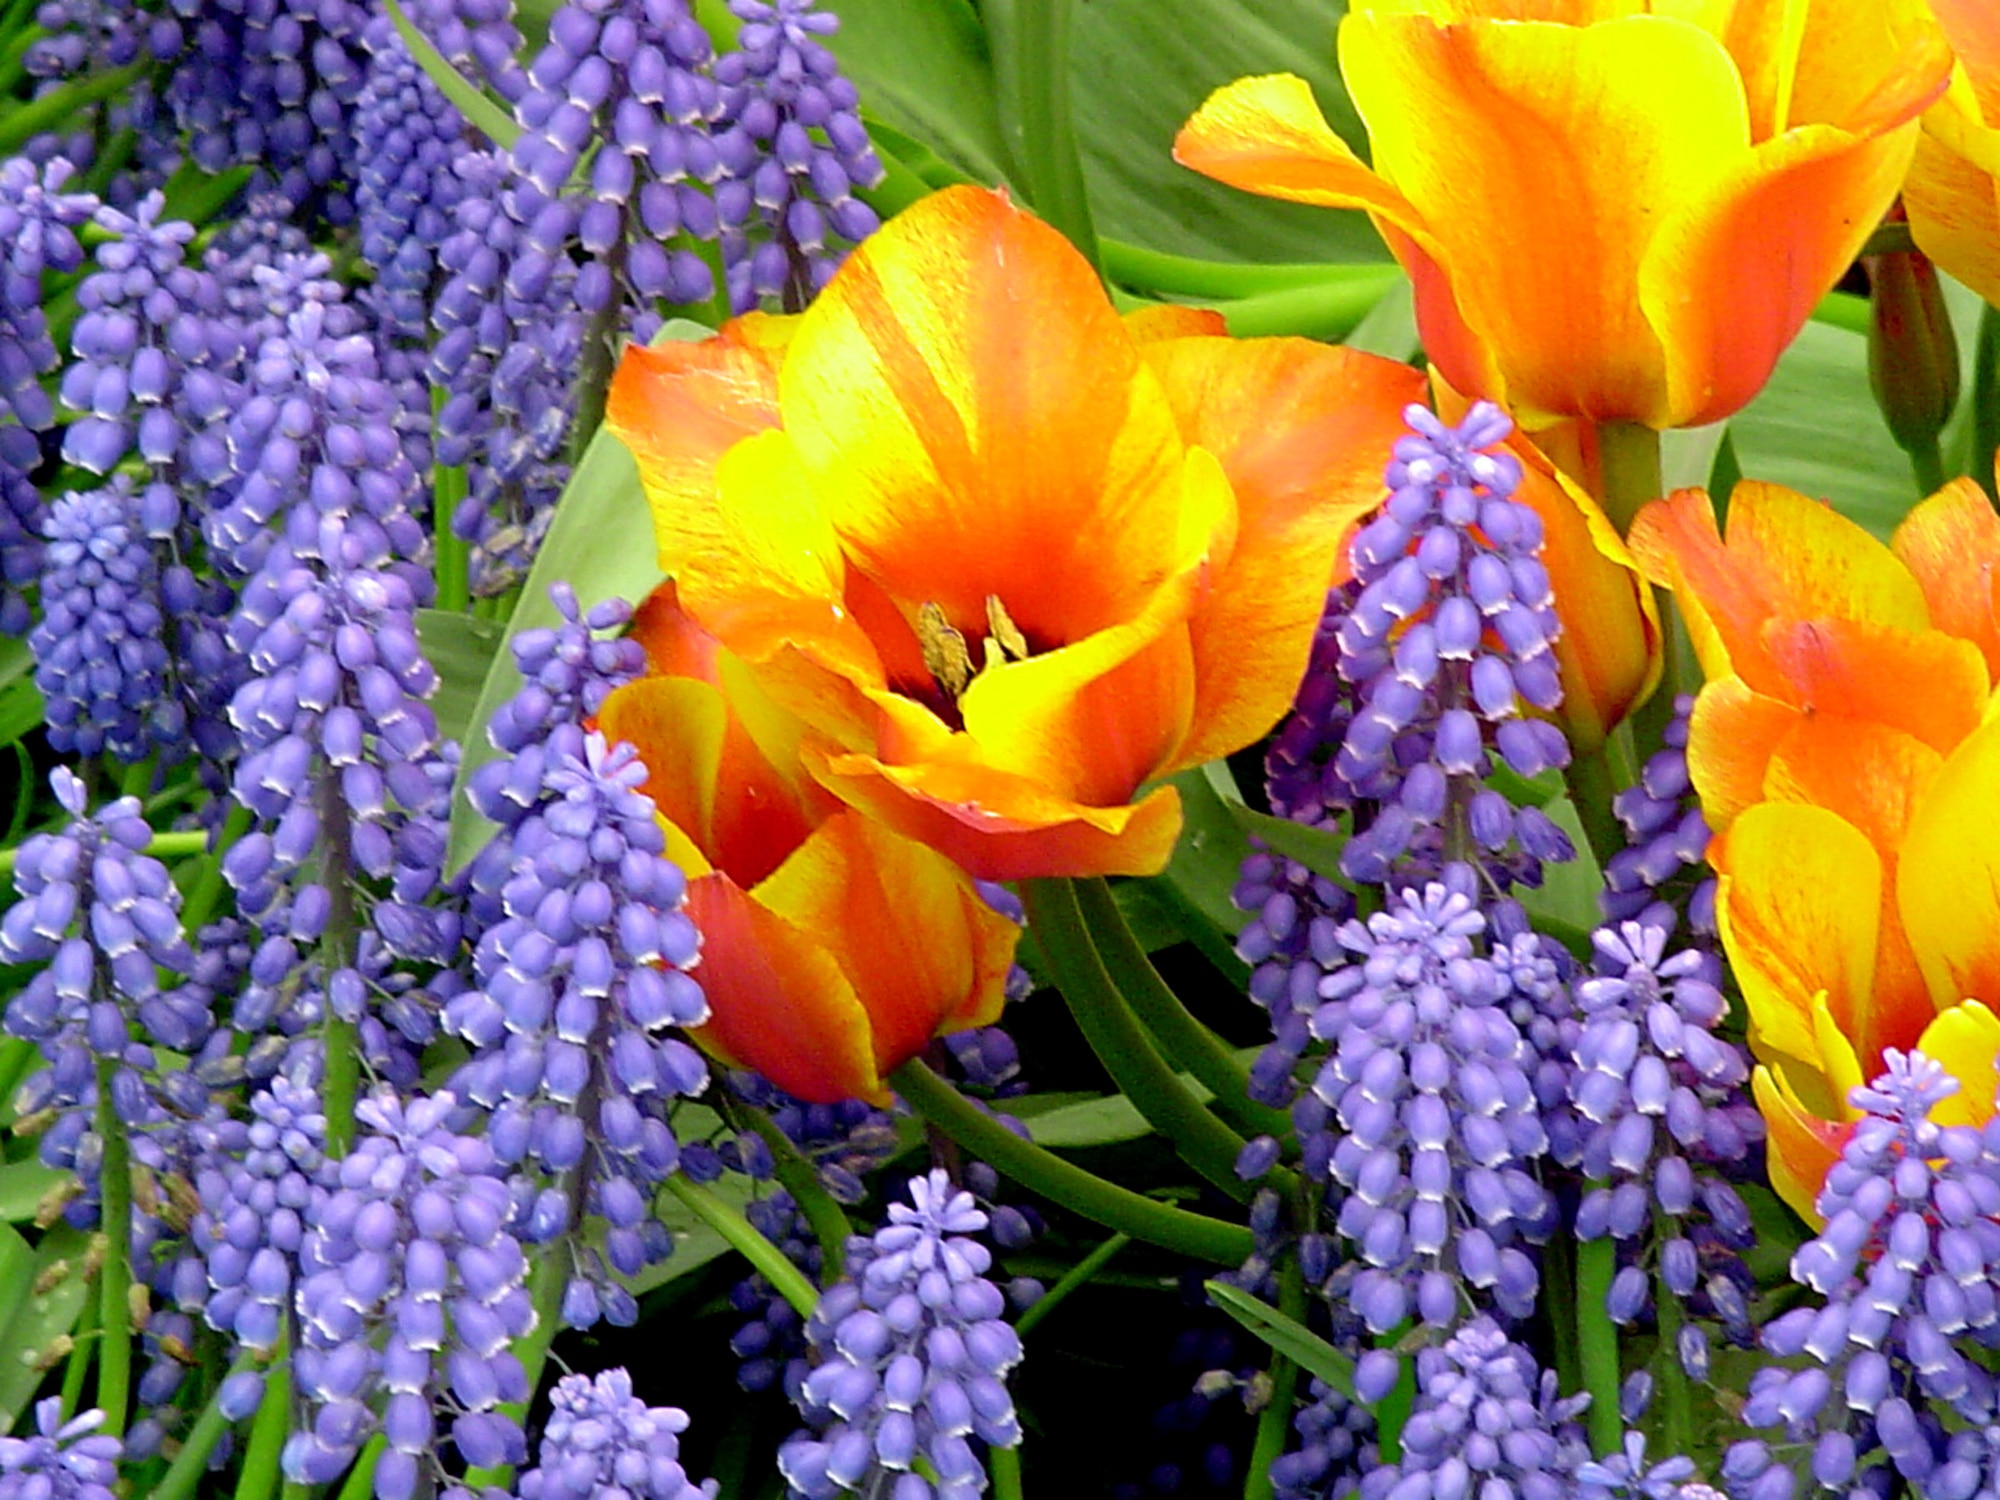 KEUKENHOF, Holland - The park offers many different kinds of flowers and theme gardens in which flower bulbs play the lead role -- Abstract, Scent, Color, Renaissance, Style, Border and Rockery-Shadow-Water. Every year a number of artists are selected to exhibit some 30 sculptures and other objects of art throughout the park. There are restaurants, sunny terraces and coffee shops available at the Keukenhof, as well as a huge parking lot. (Courtesy photo)